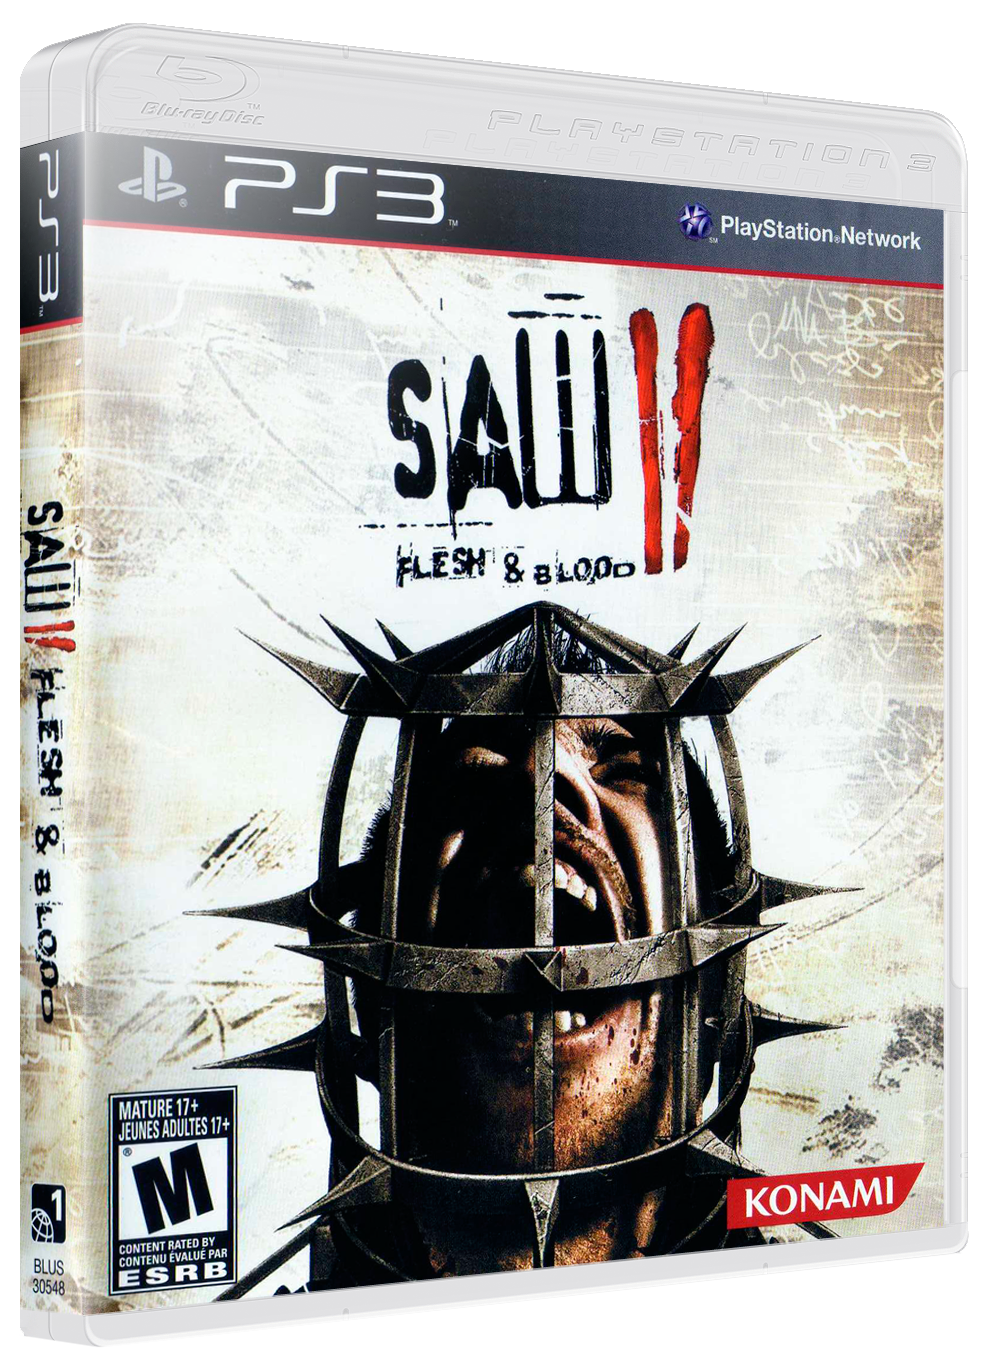 saw ii flesh and blood download pc